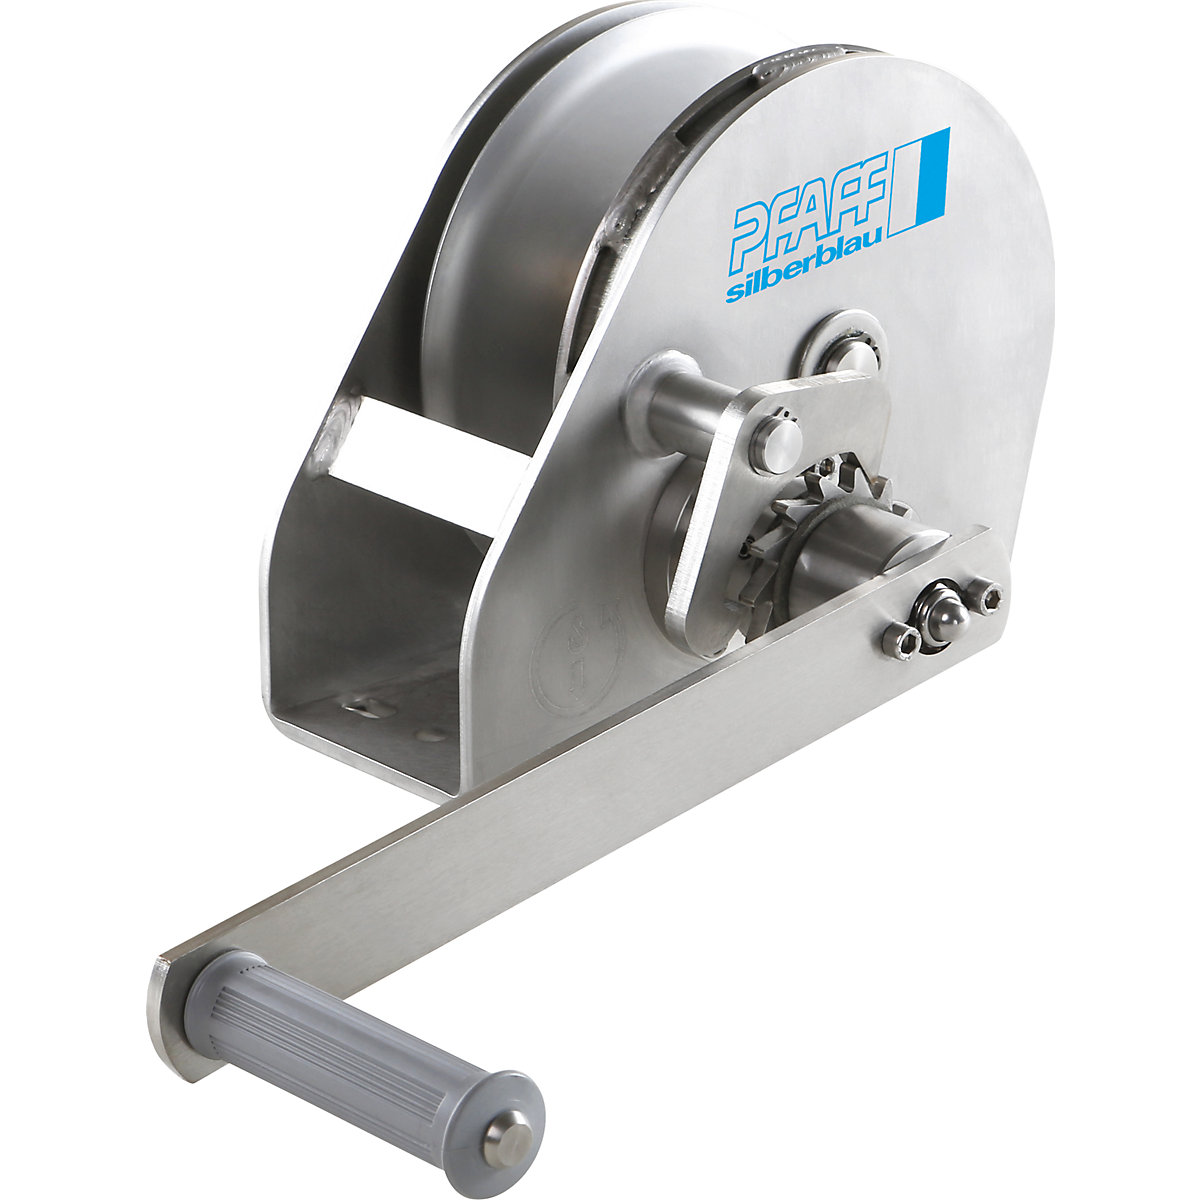 LB panel cable winch, stainless steel, max. lifting load 650 kg-2